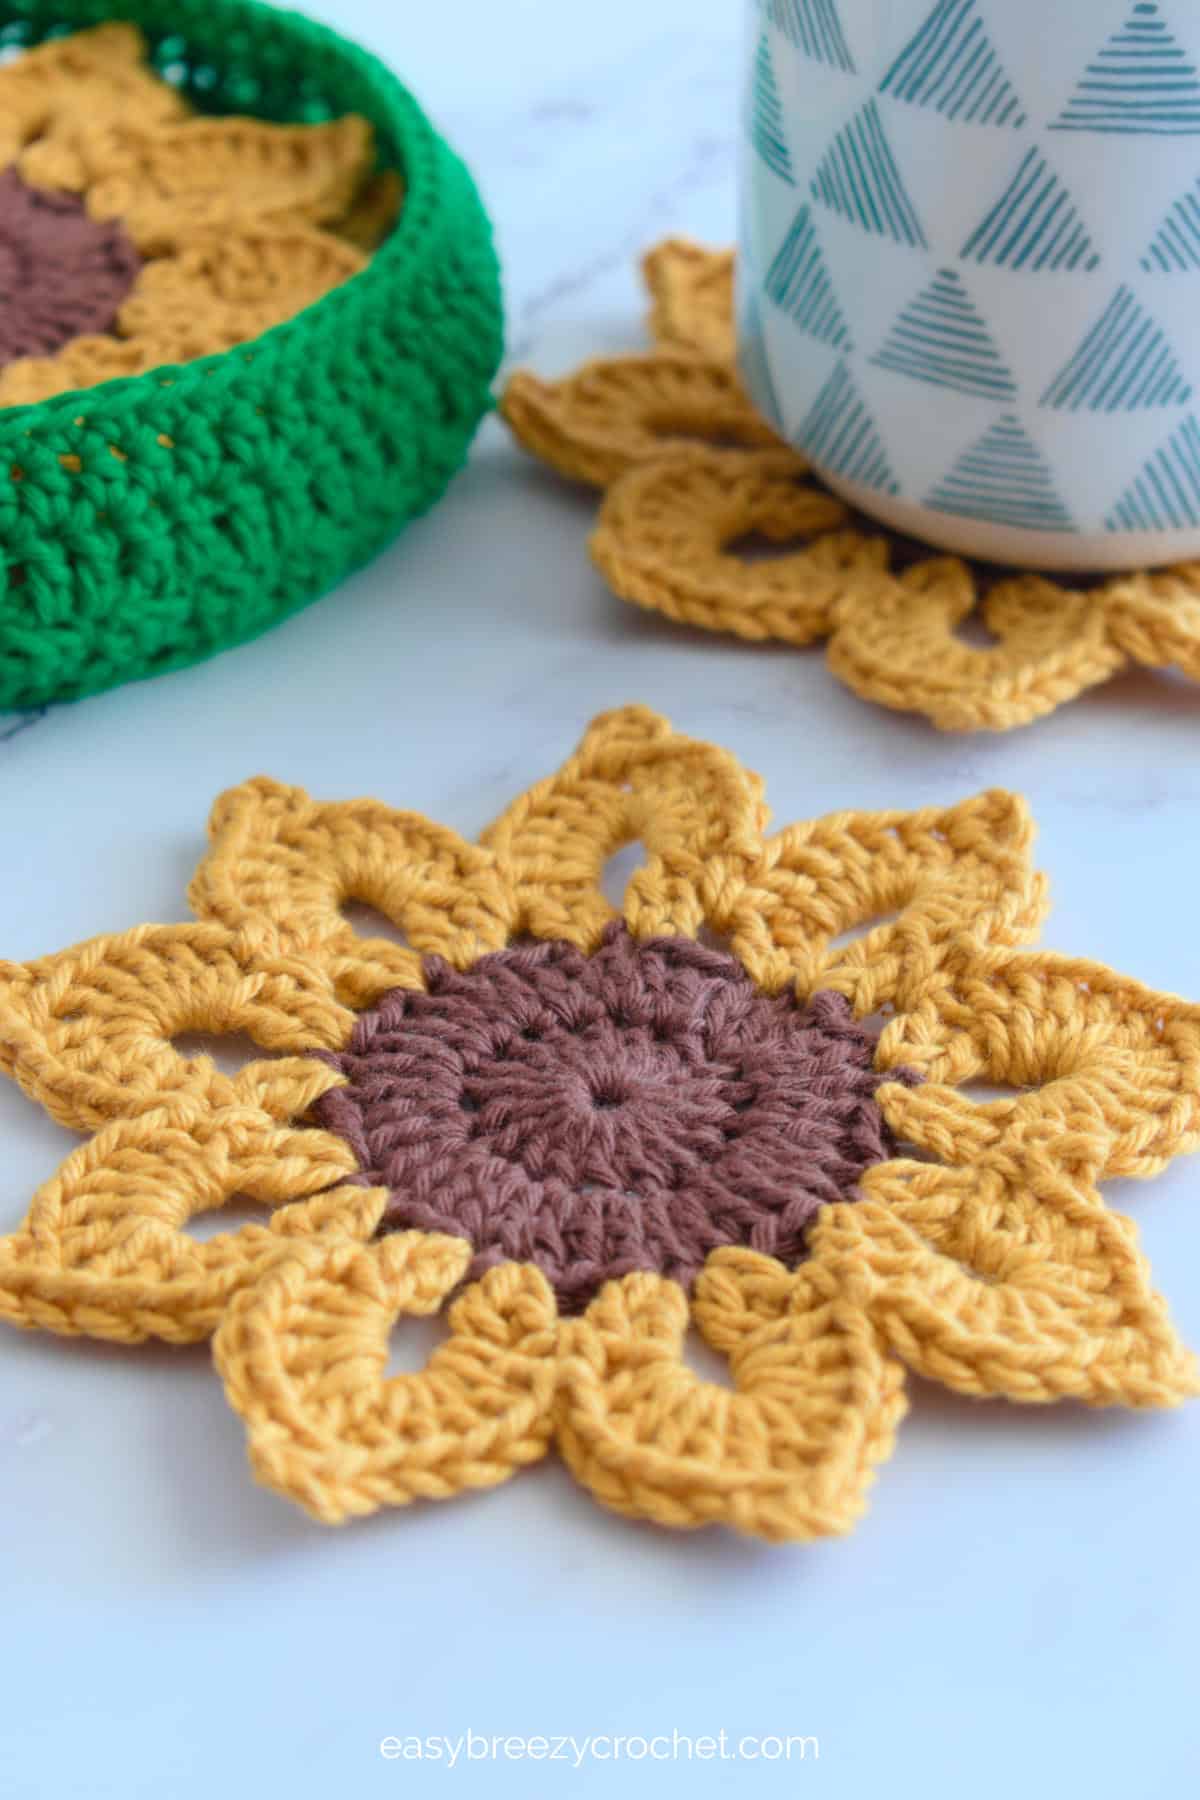 Close up of a crochet sunflower coaster with a cup on a coaster in the background.